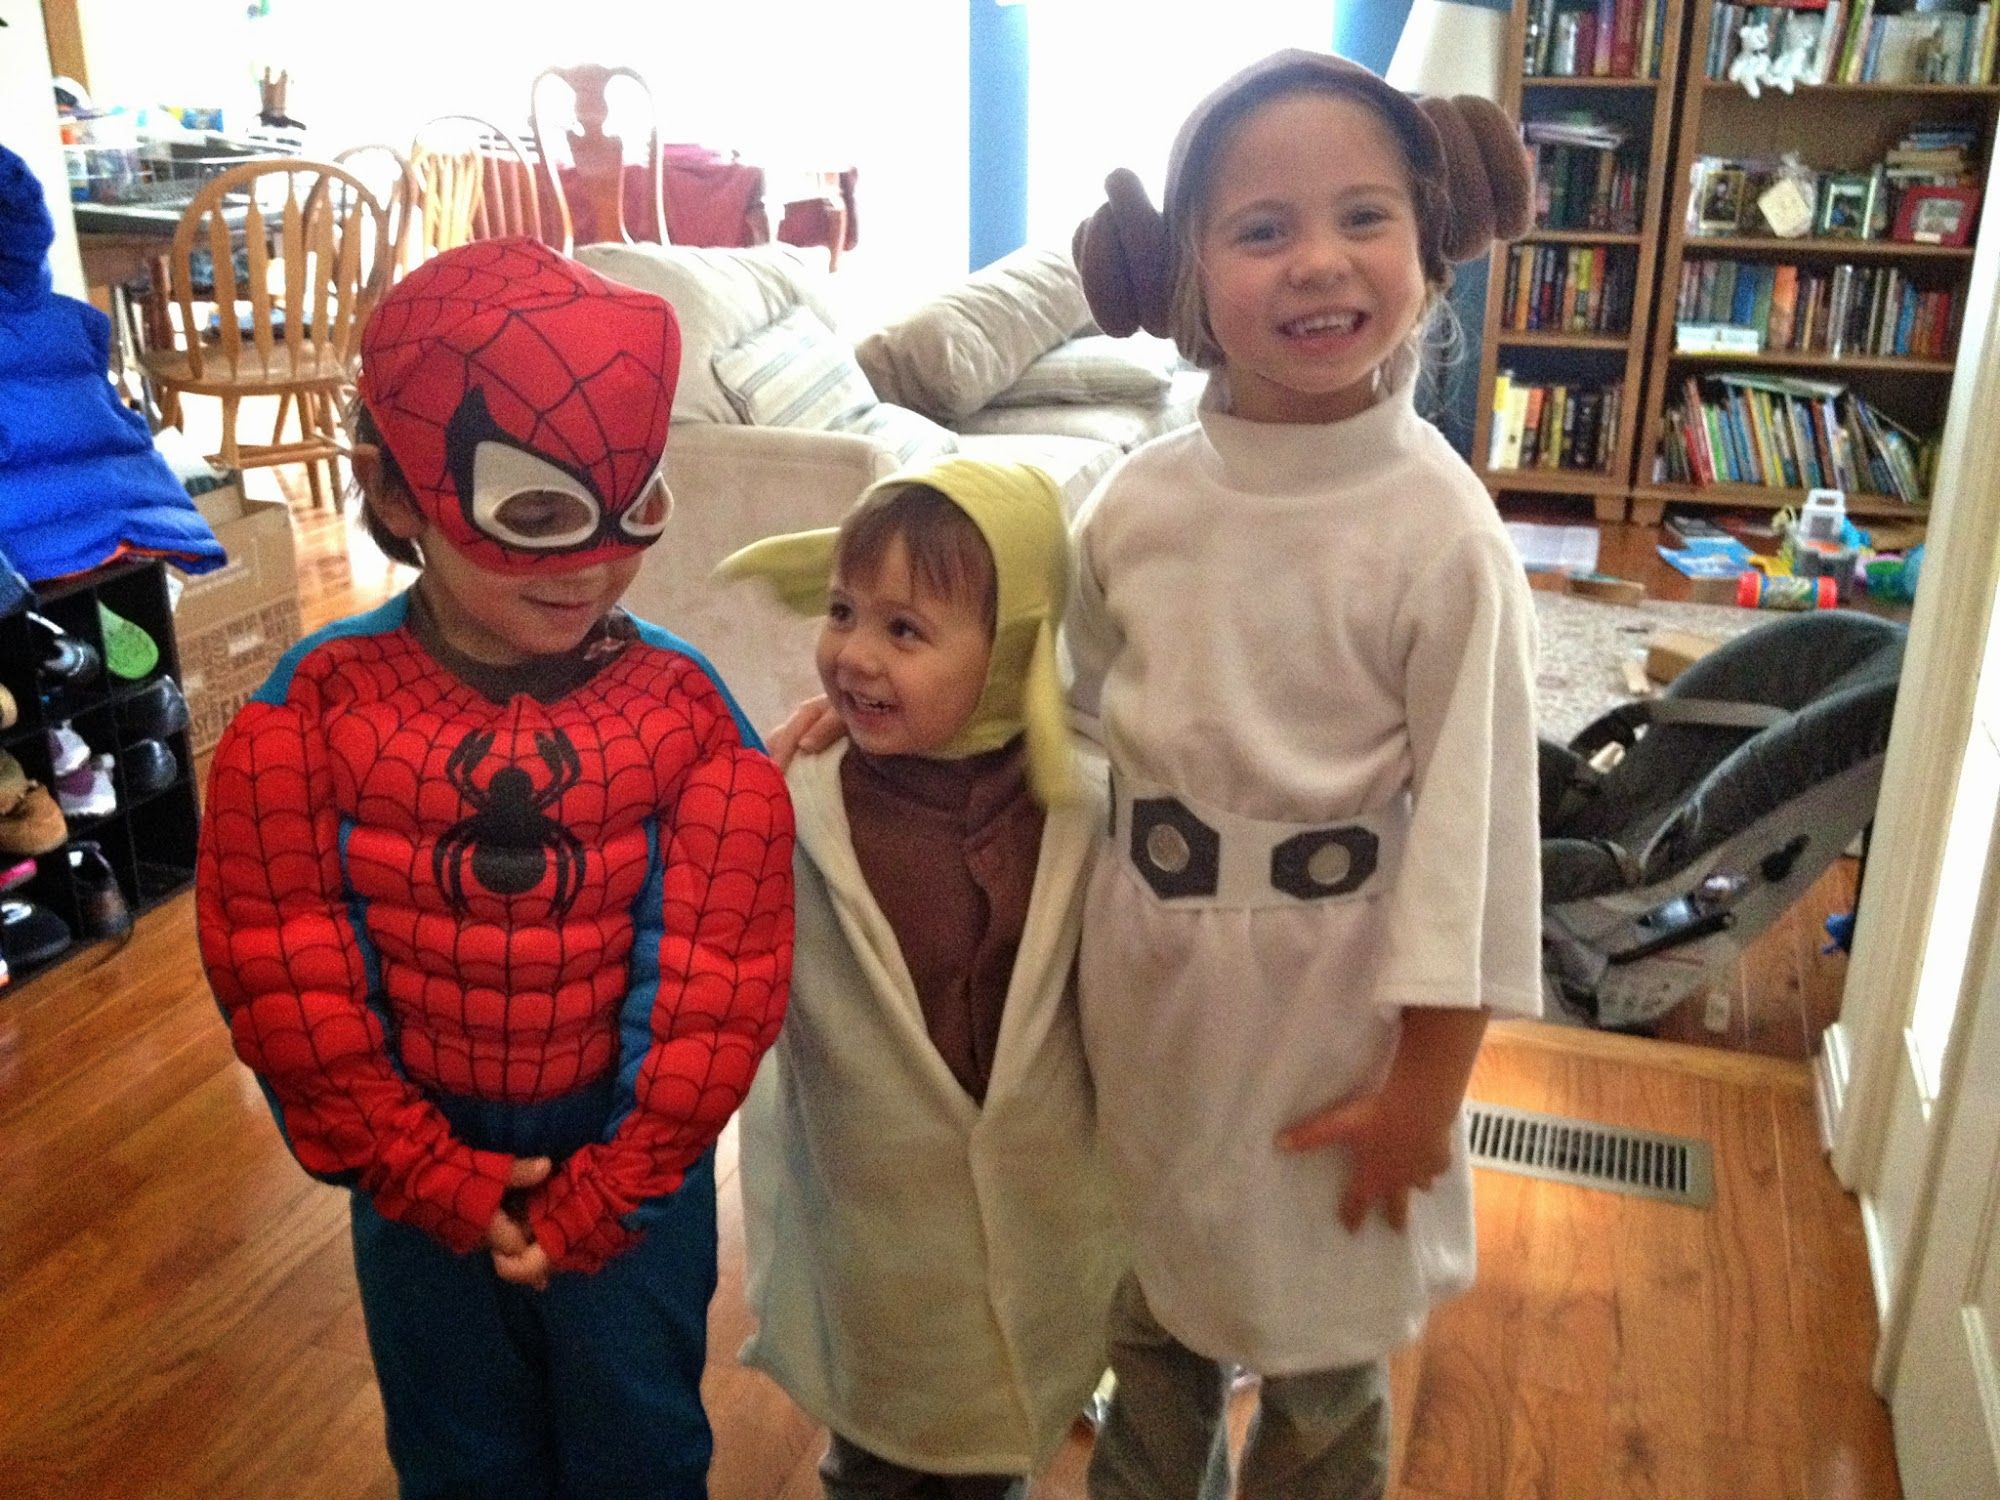  Getting ready to go to Boogie's party and parade with our neighbor Spider Man 